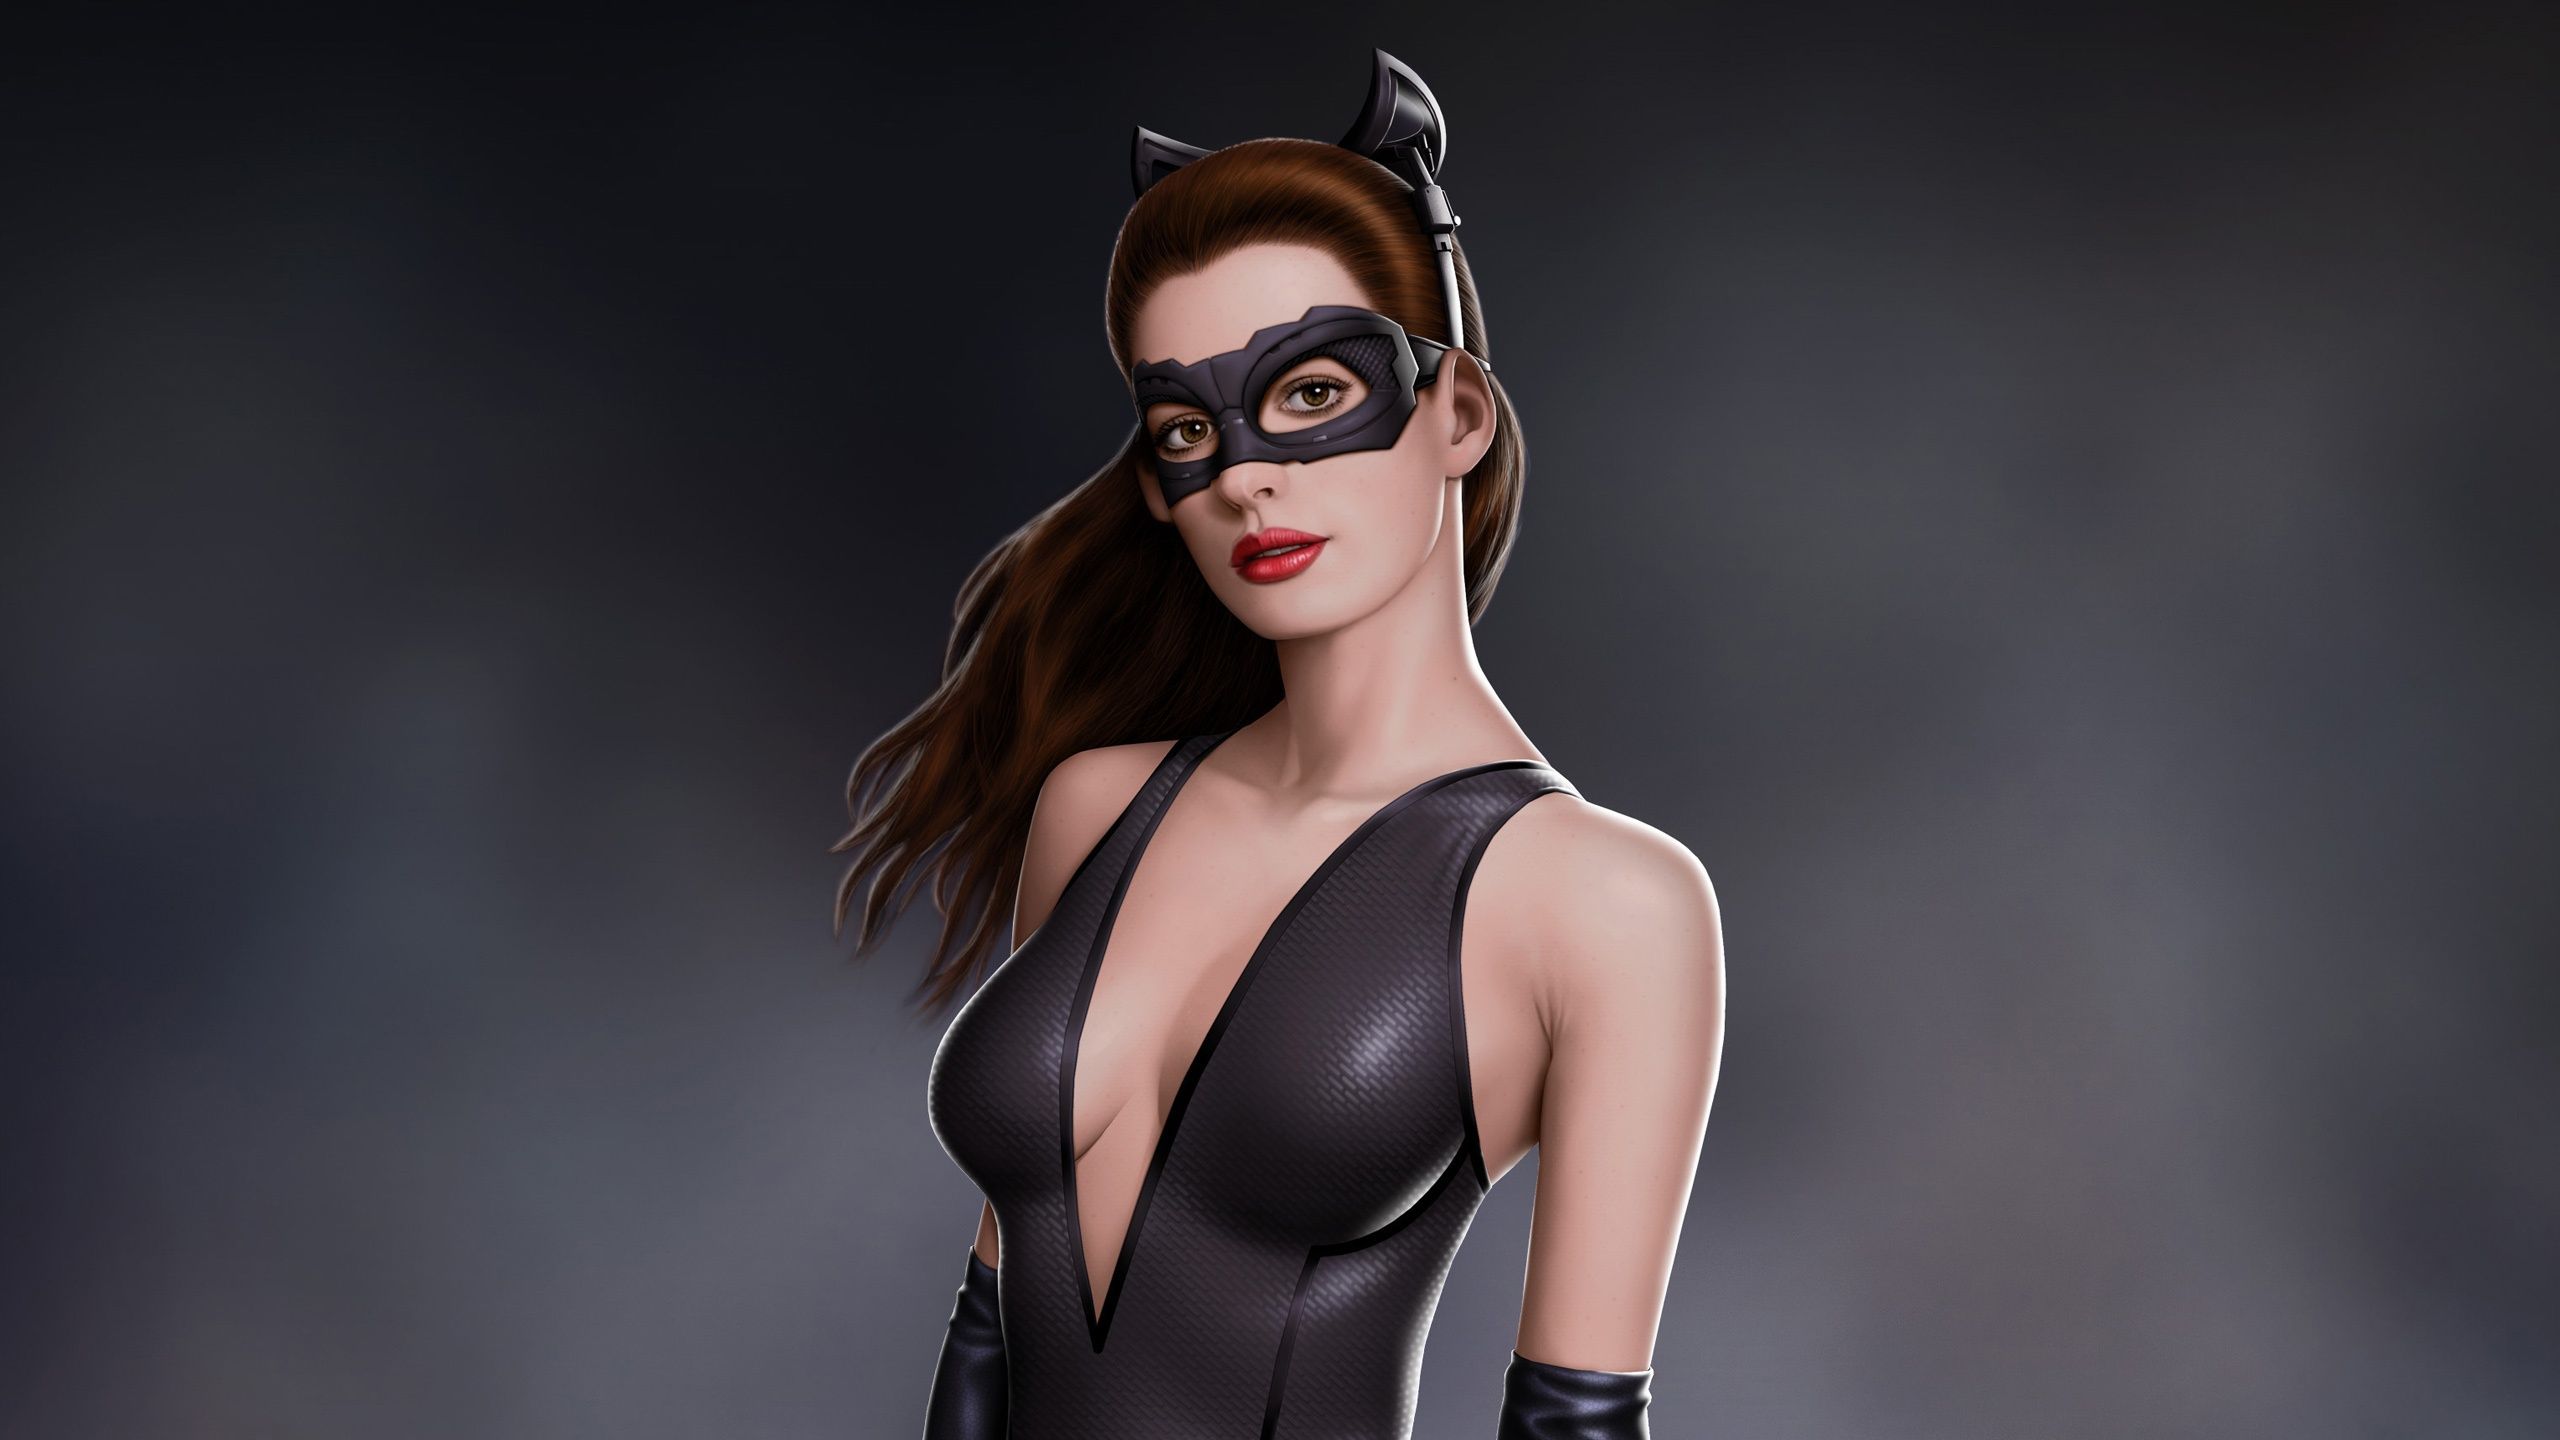 Anne Hathaway In Batman Movie As Catwoman 750x1334 IPhone 8 7 6 6S